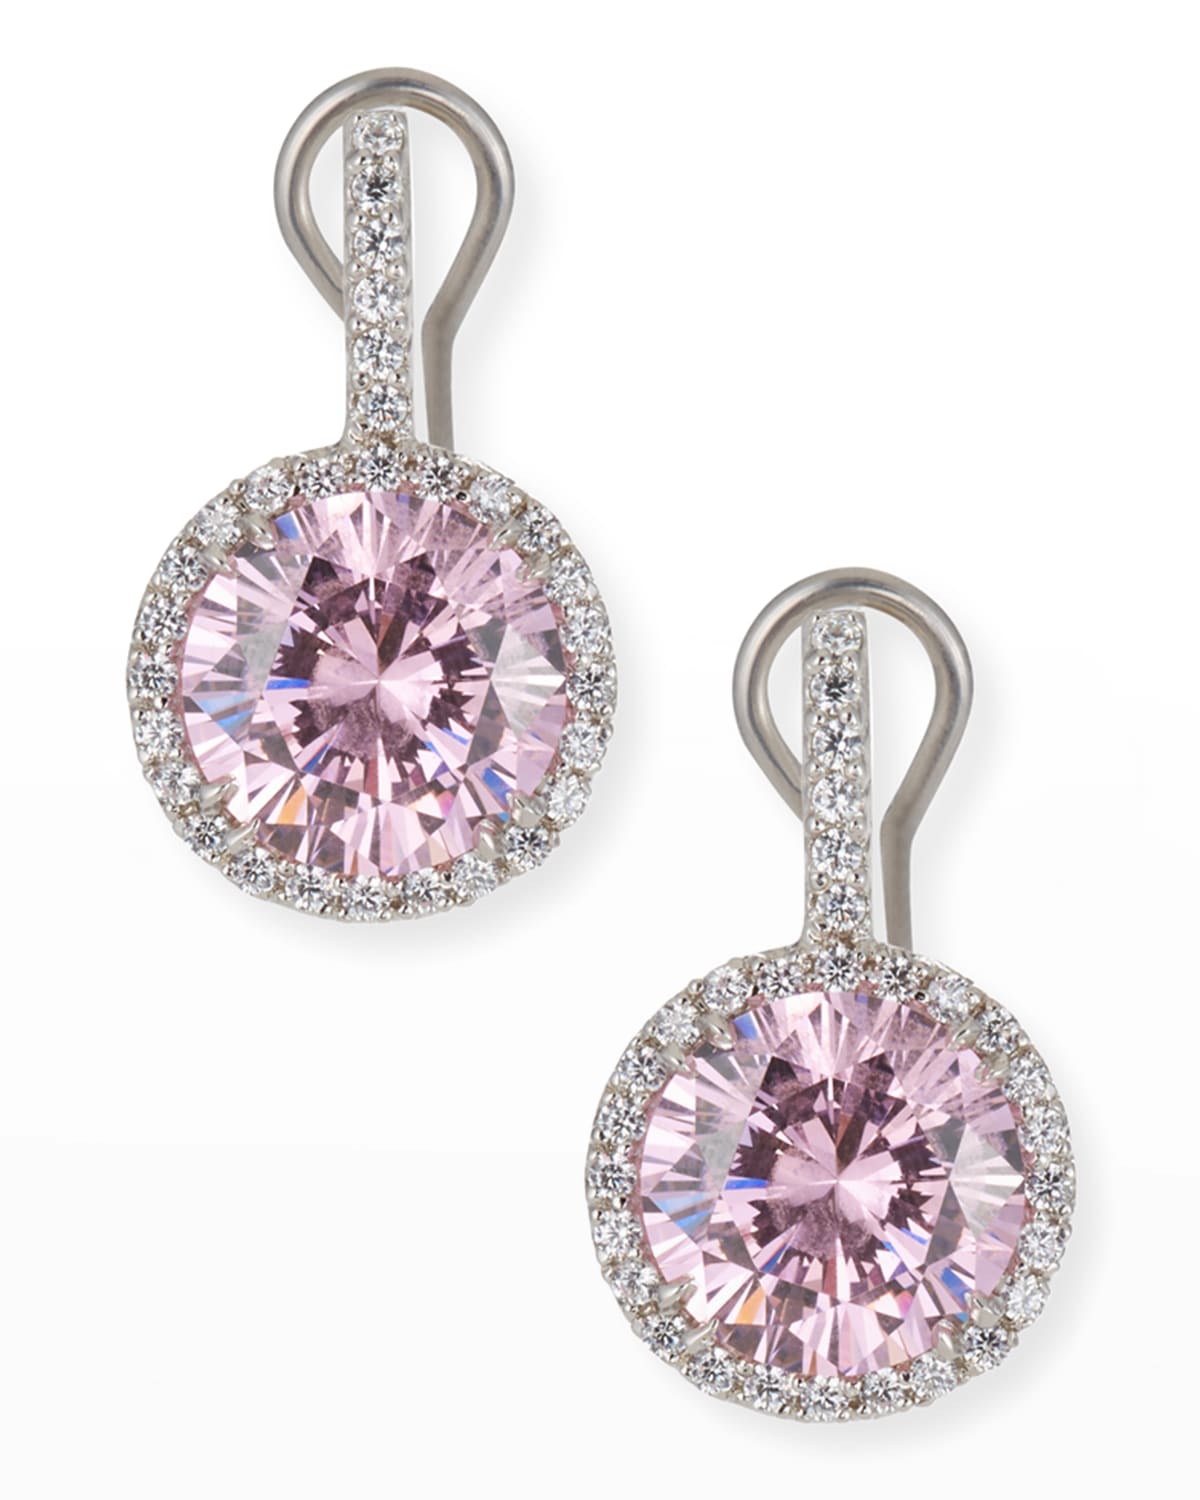 Fantasia By Deserio 18 Tcw Round Cubic Zirconia & Halo Drop Earrings, Clear/pink